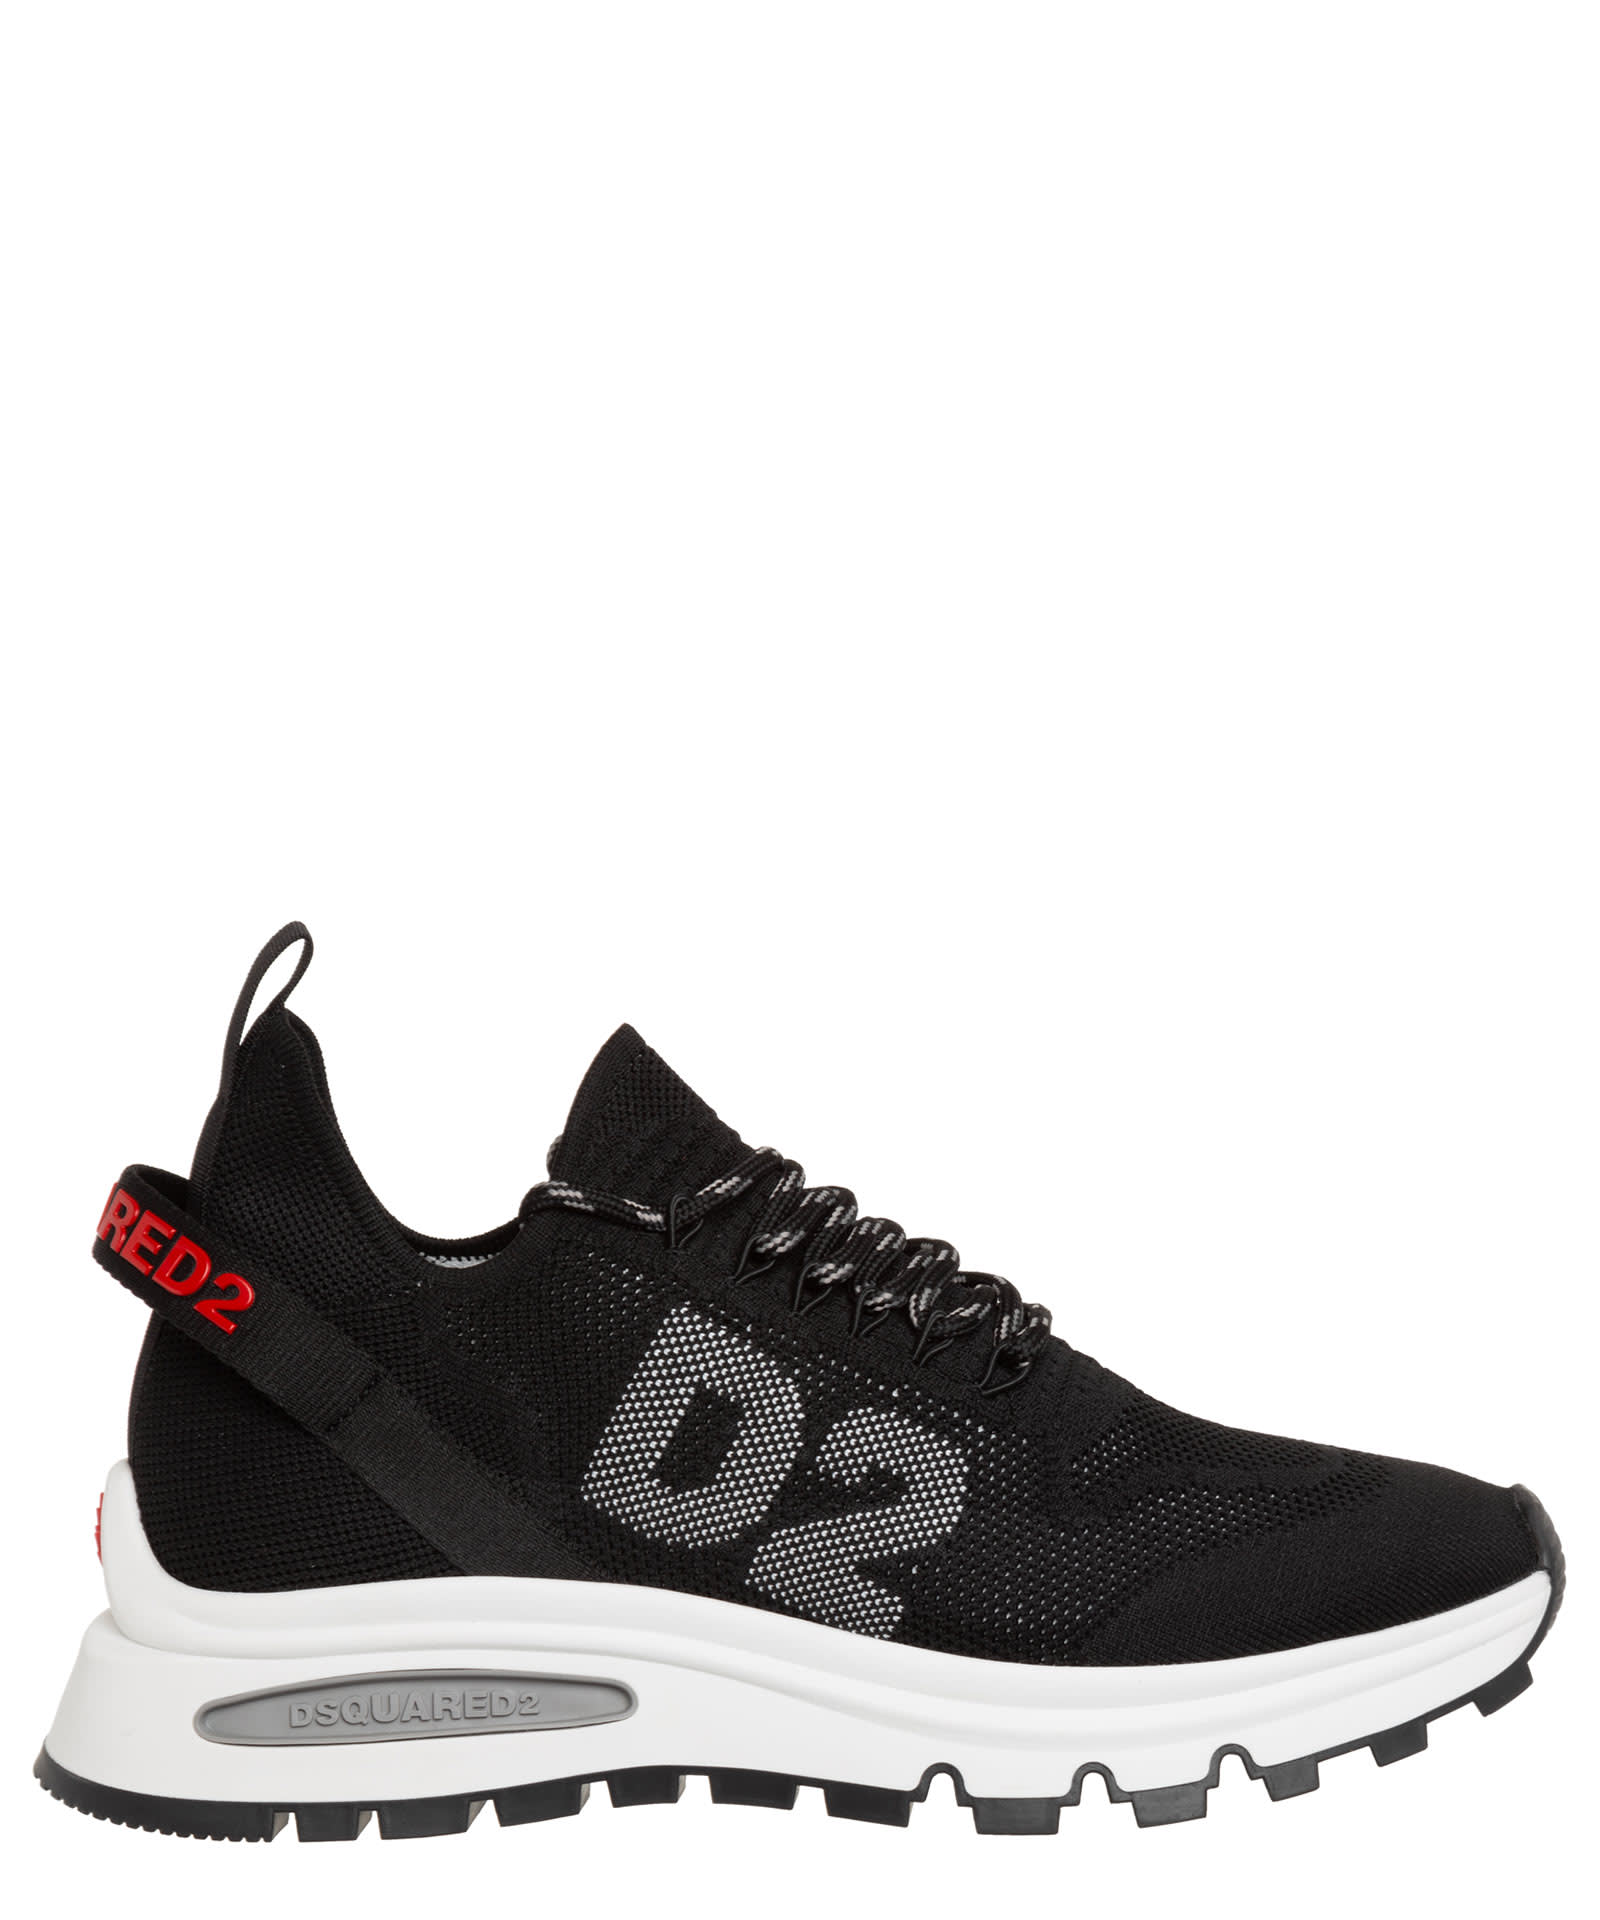 Dsquared2 Run Ds2 Leather Sneakers